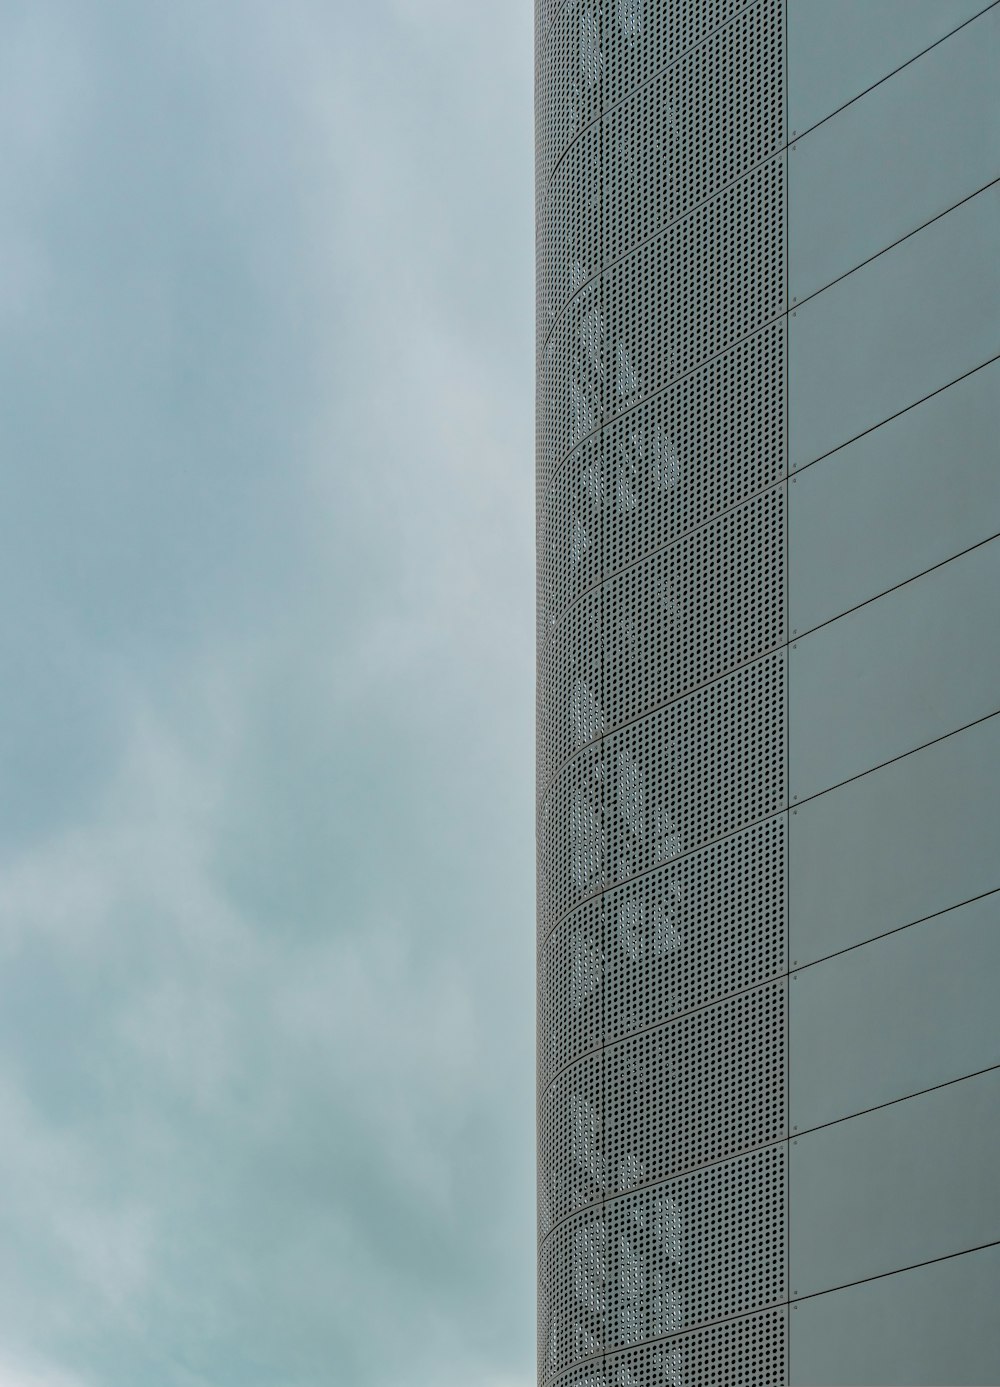 gray concrete building under cloudy sky during daytime